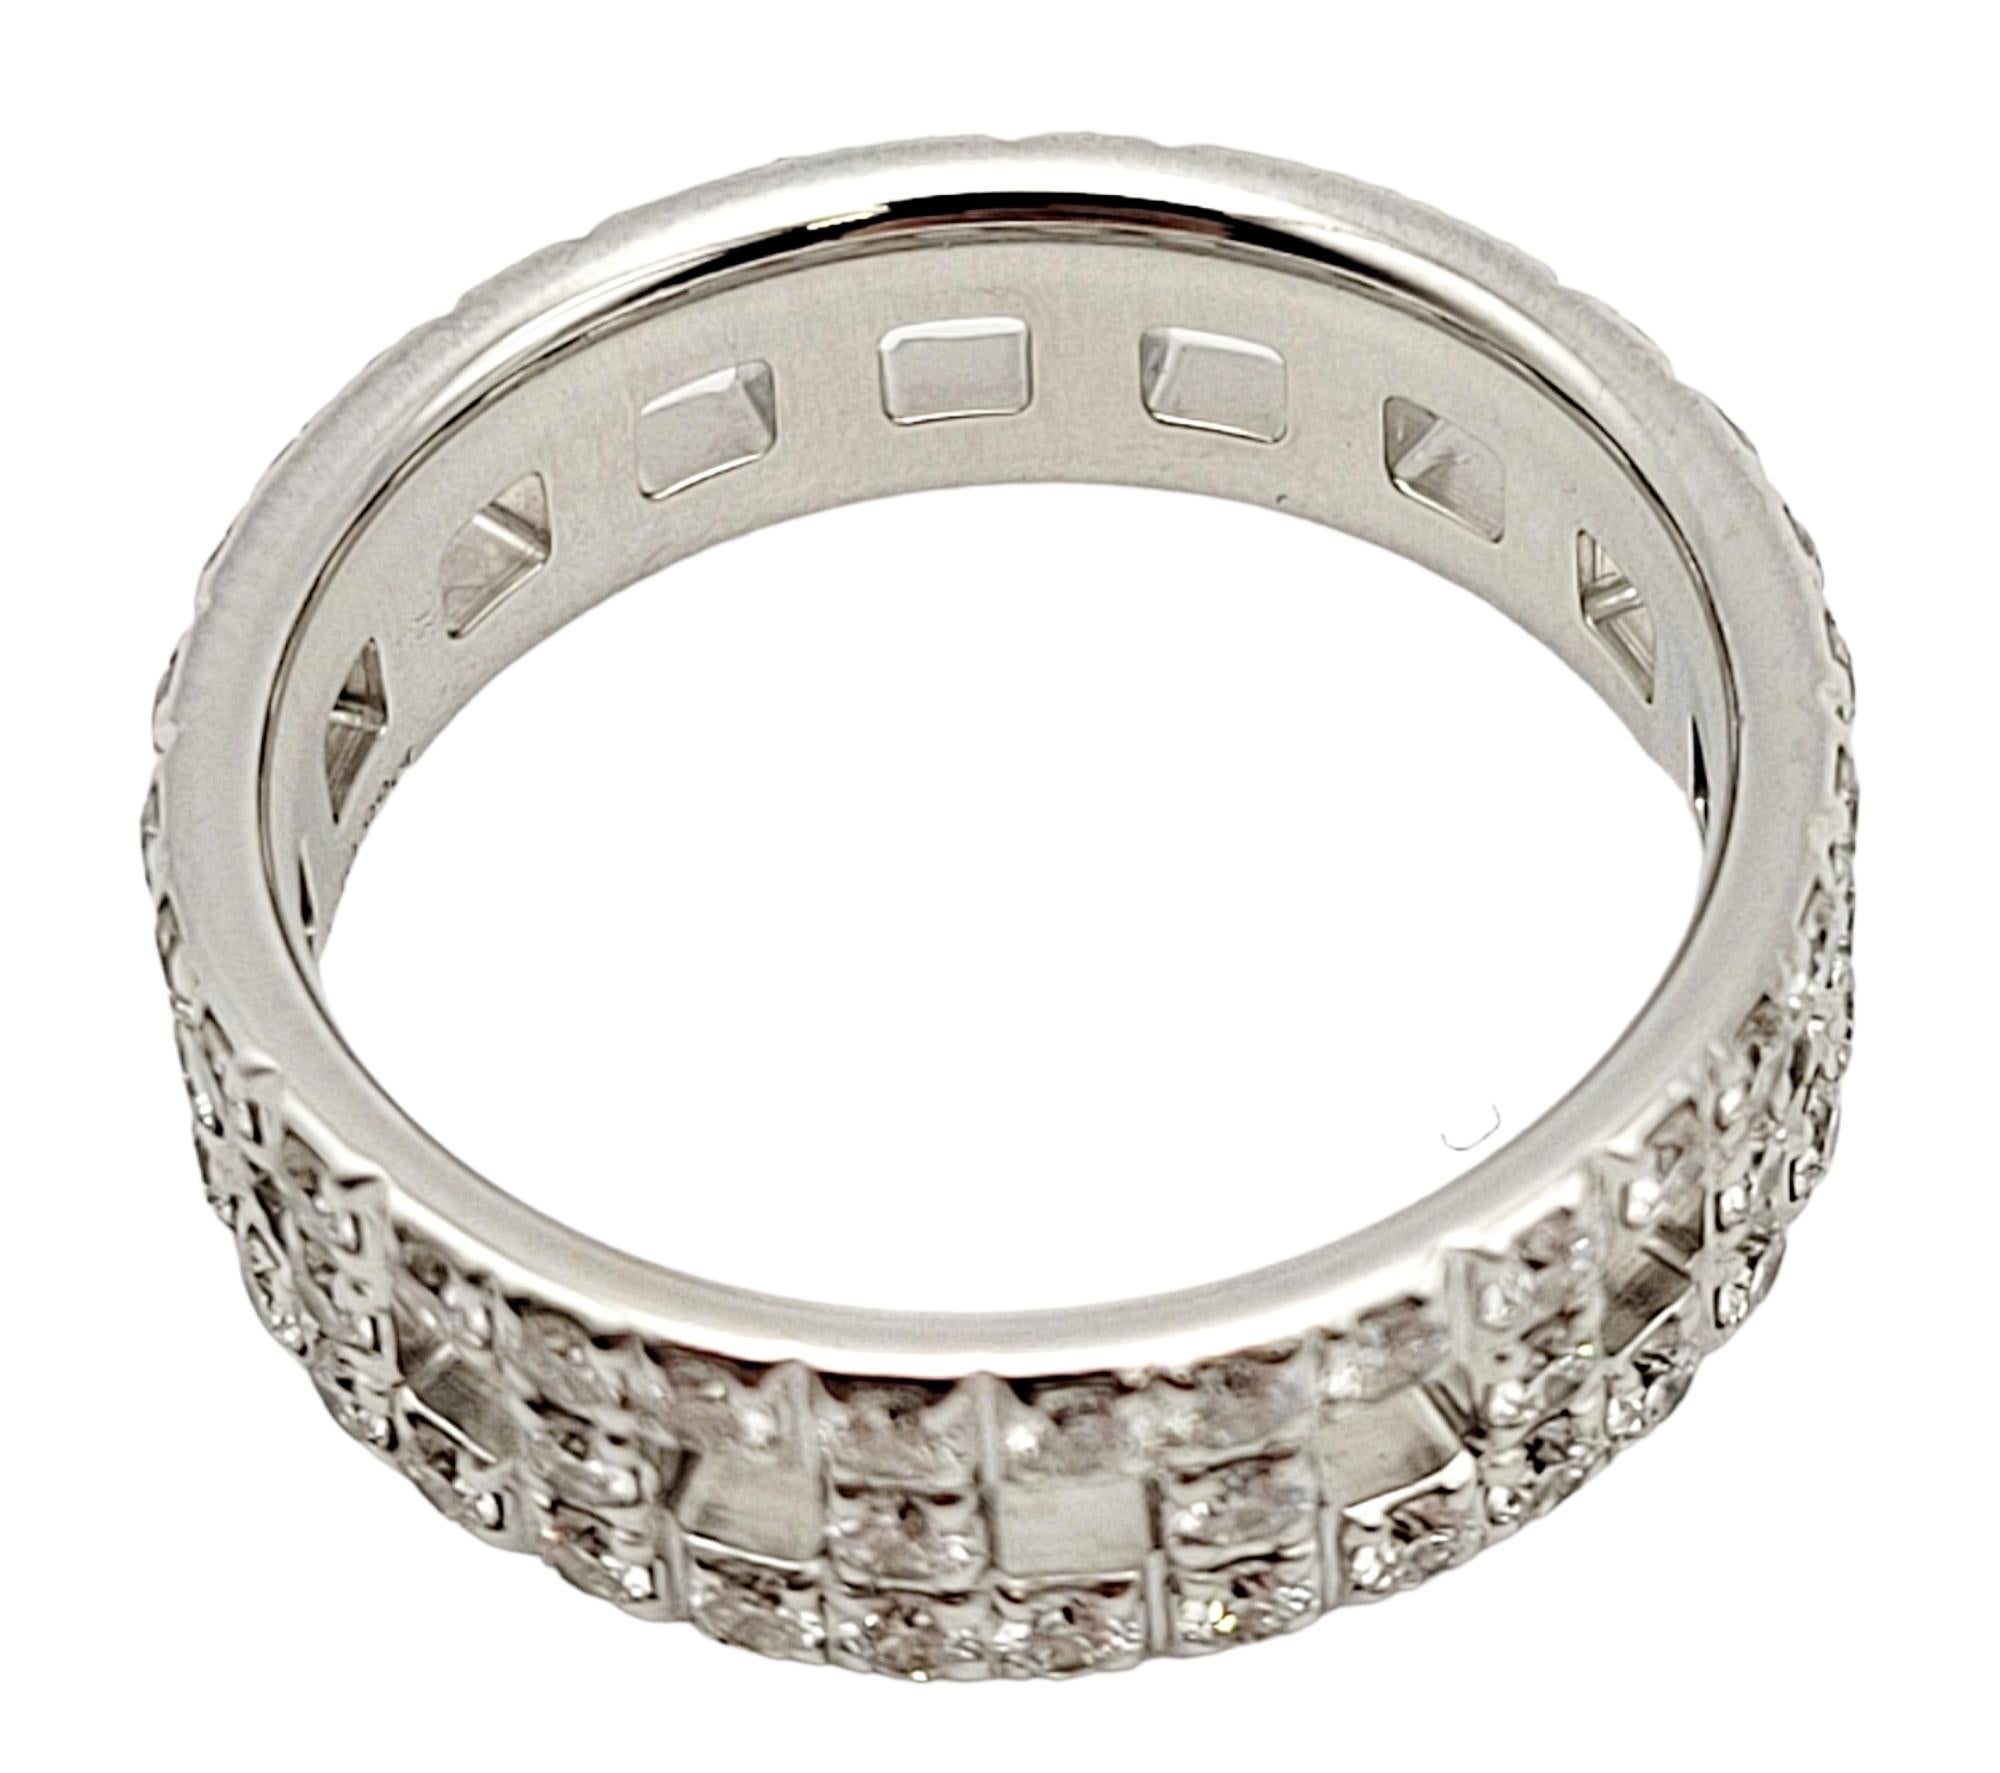 Tiffany & Co. Tiffany T True Wide Band Ring with Diamonds in 18 Karat White Gold 3